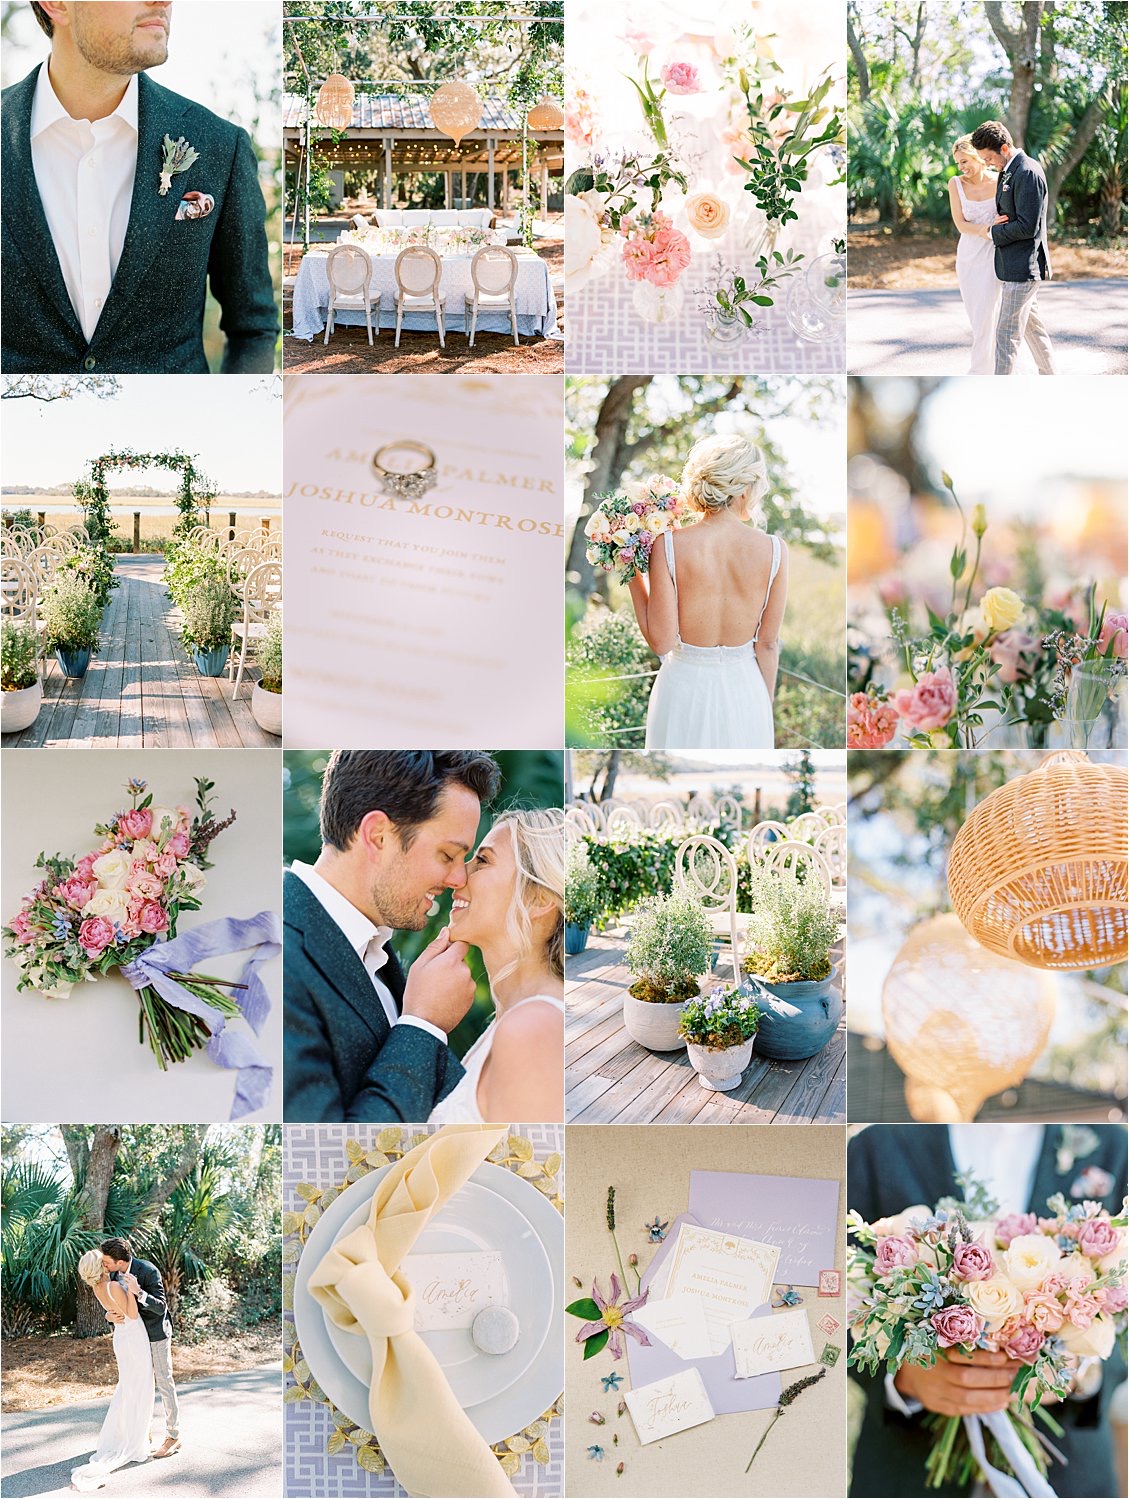 Kiawah Island Spring Wedding Inspiration by Charleston Film Wedding Photographer, Renee Hollingshead with The Petal Report, Branch Design Studio, Event Haus Rental, The Collection by Courtney Inghram, Pampered and Pretty, Wild Ivory Beauty, Emily Kotarski Bridal, M. Dumas & Sons, Hatchgrove Designs, and more at Mingo Point in Kiawah Island Resort